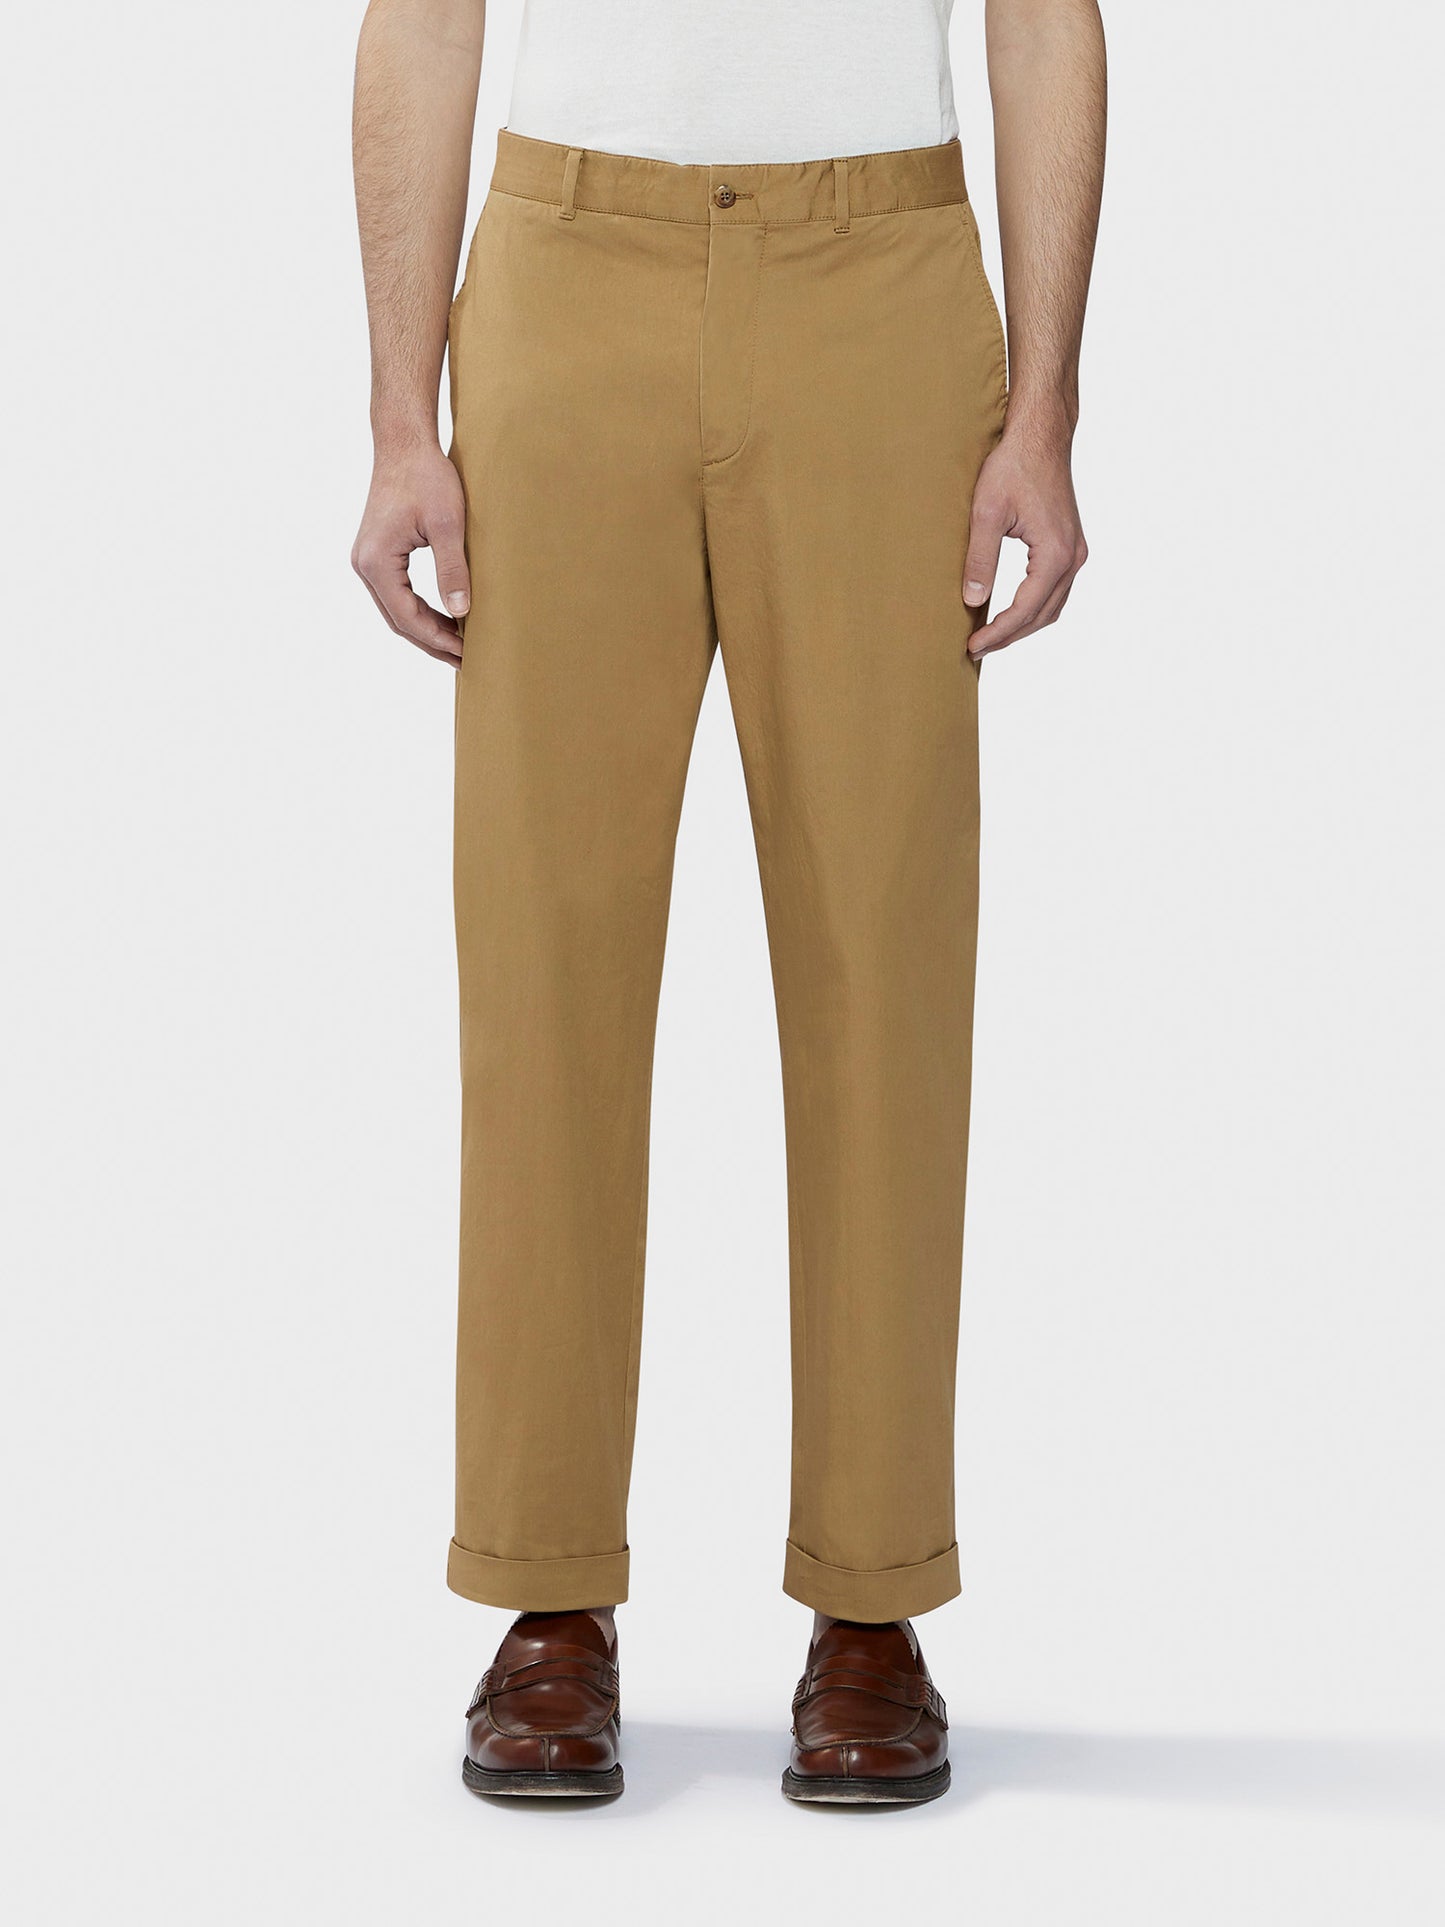 Sand-colored trousers in a cotton-elastane blend